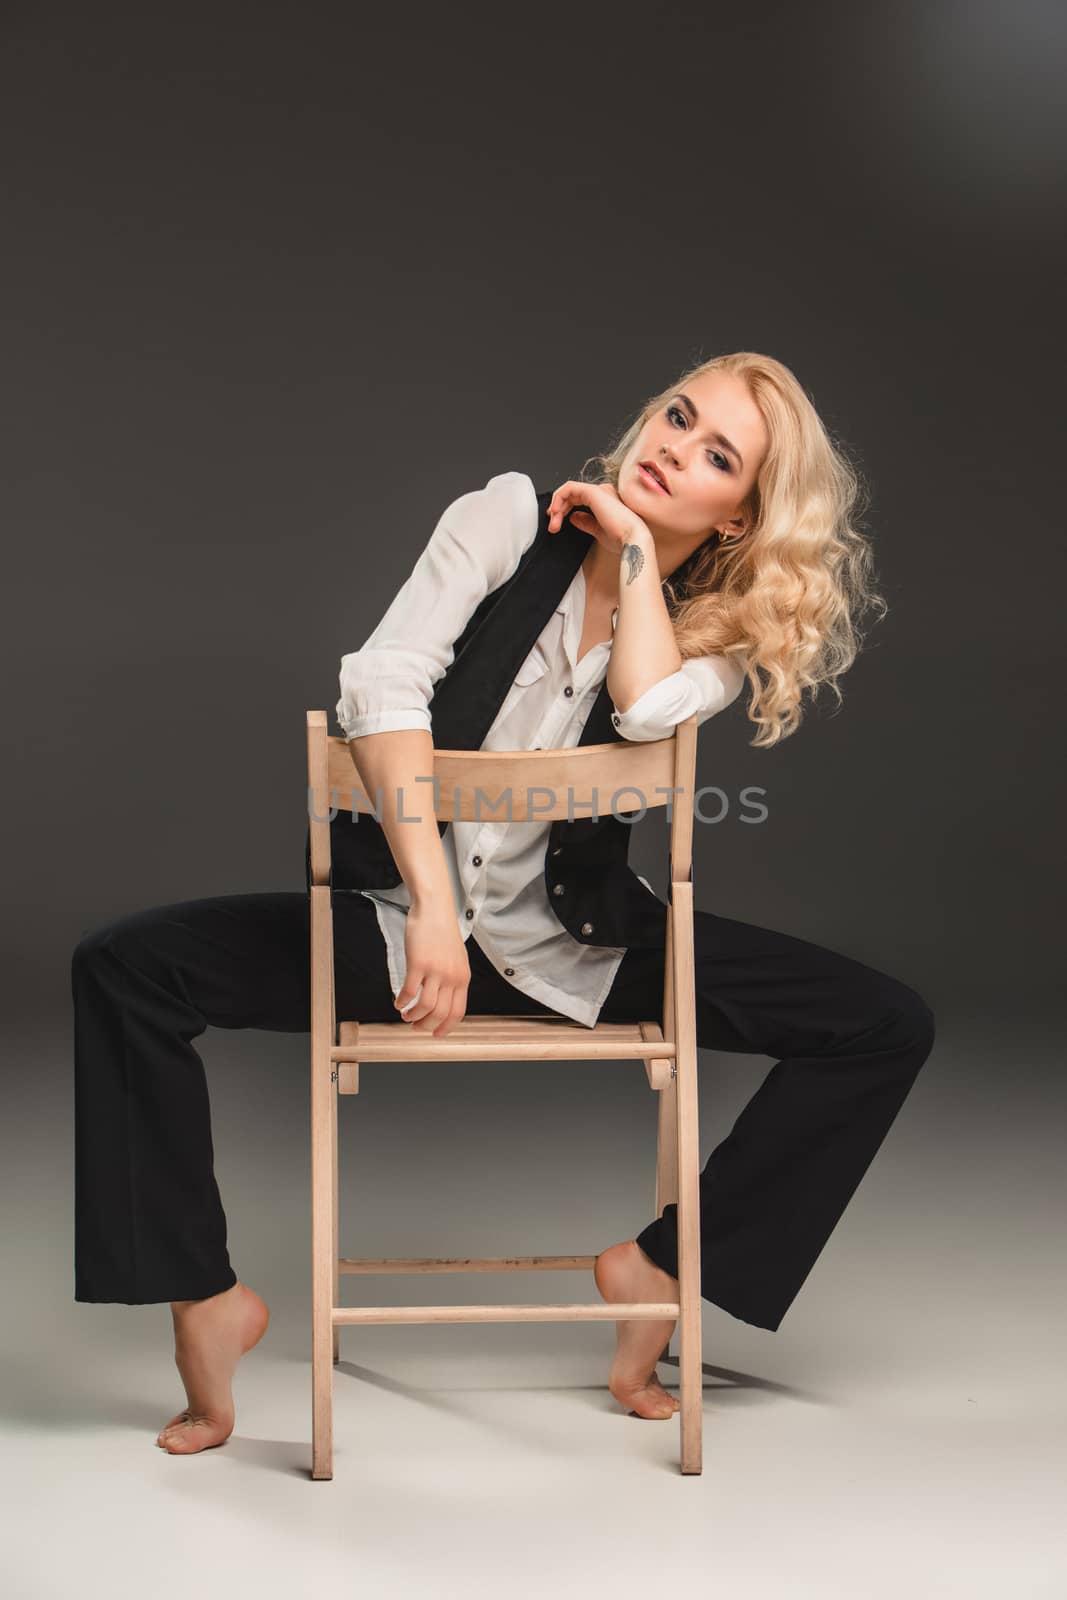 Beauty blond woman  in a black suit and white shirt, sitting on a chair on a gray background